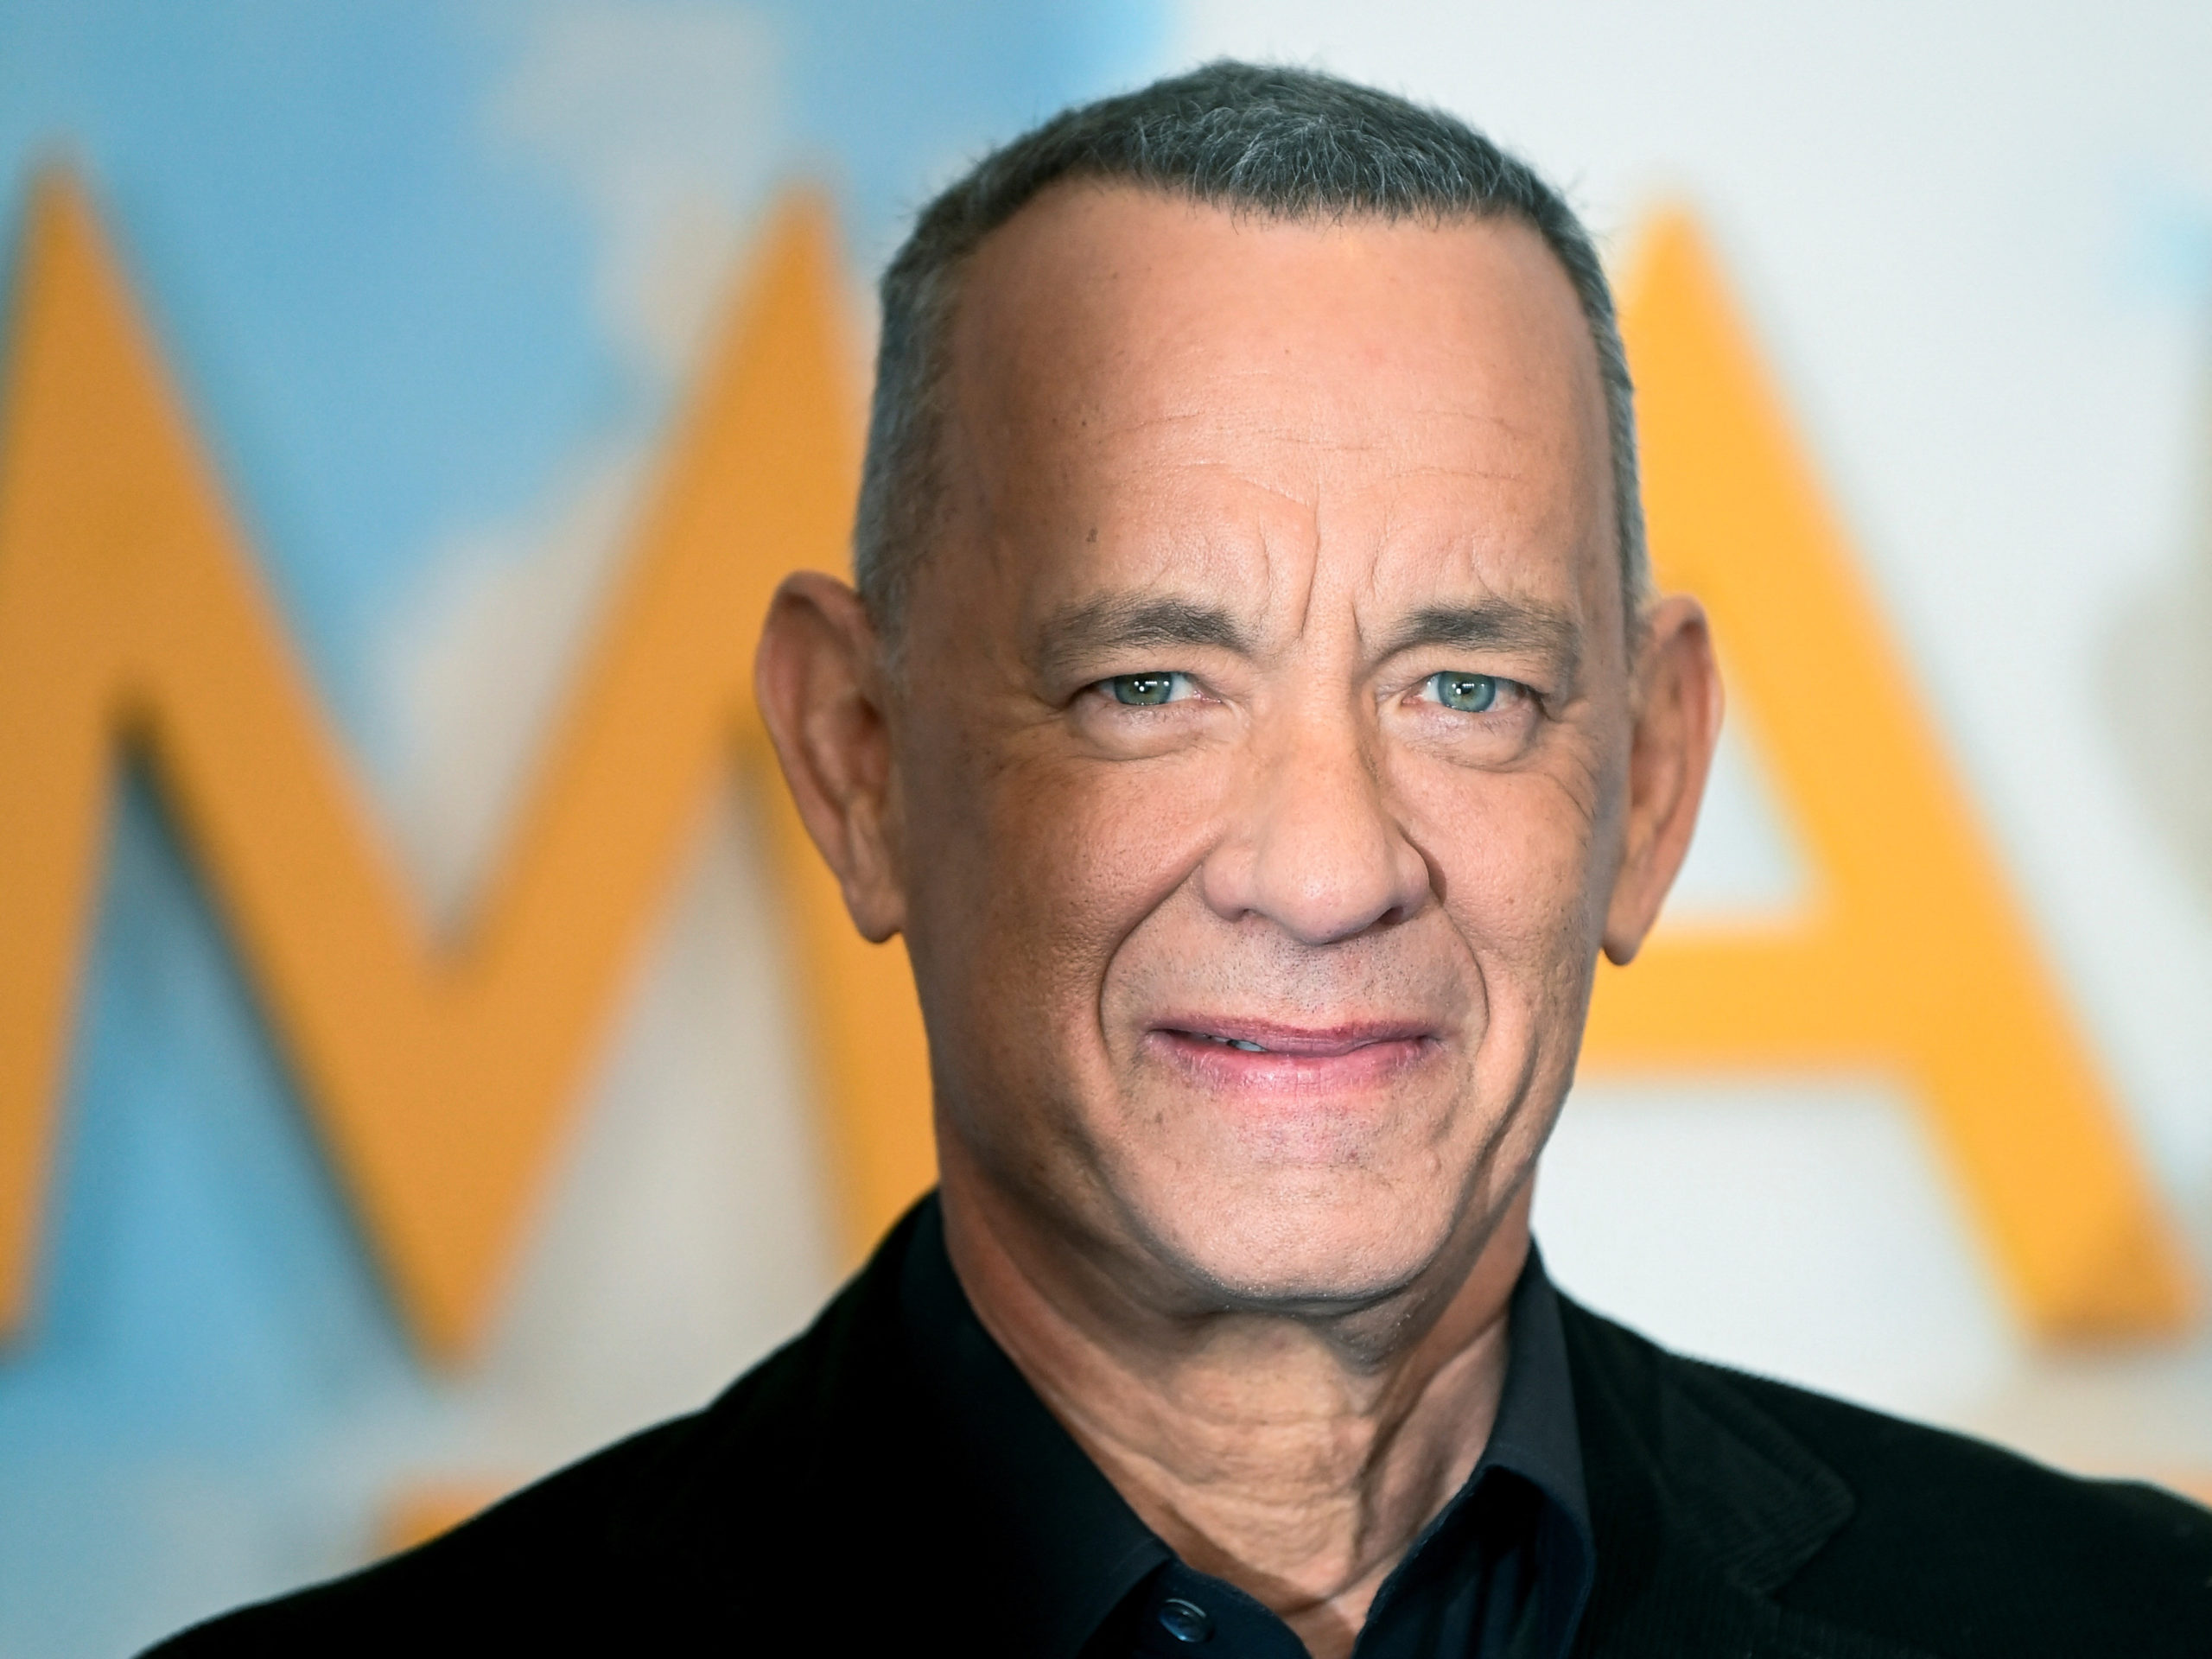 Hollywood nice guy Tom Hanks is breaking the mold by playing a grump in “A Man Called Otto.”